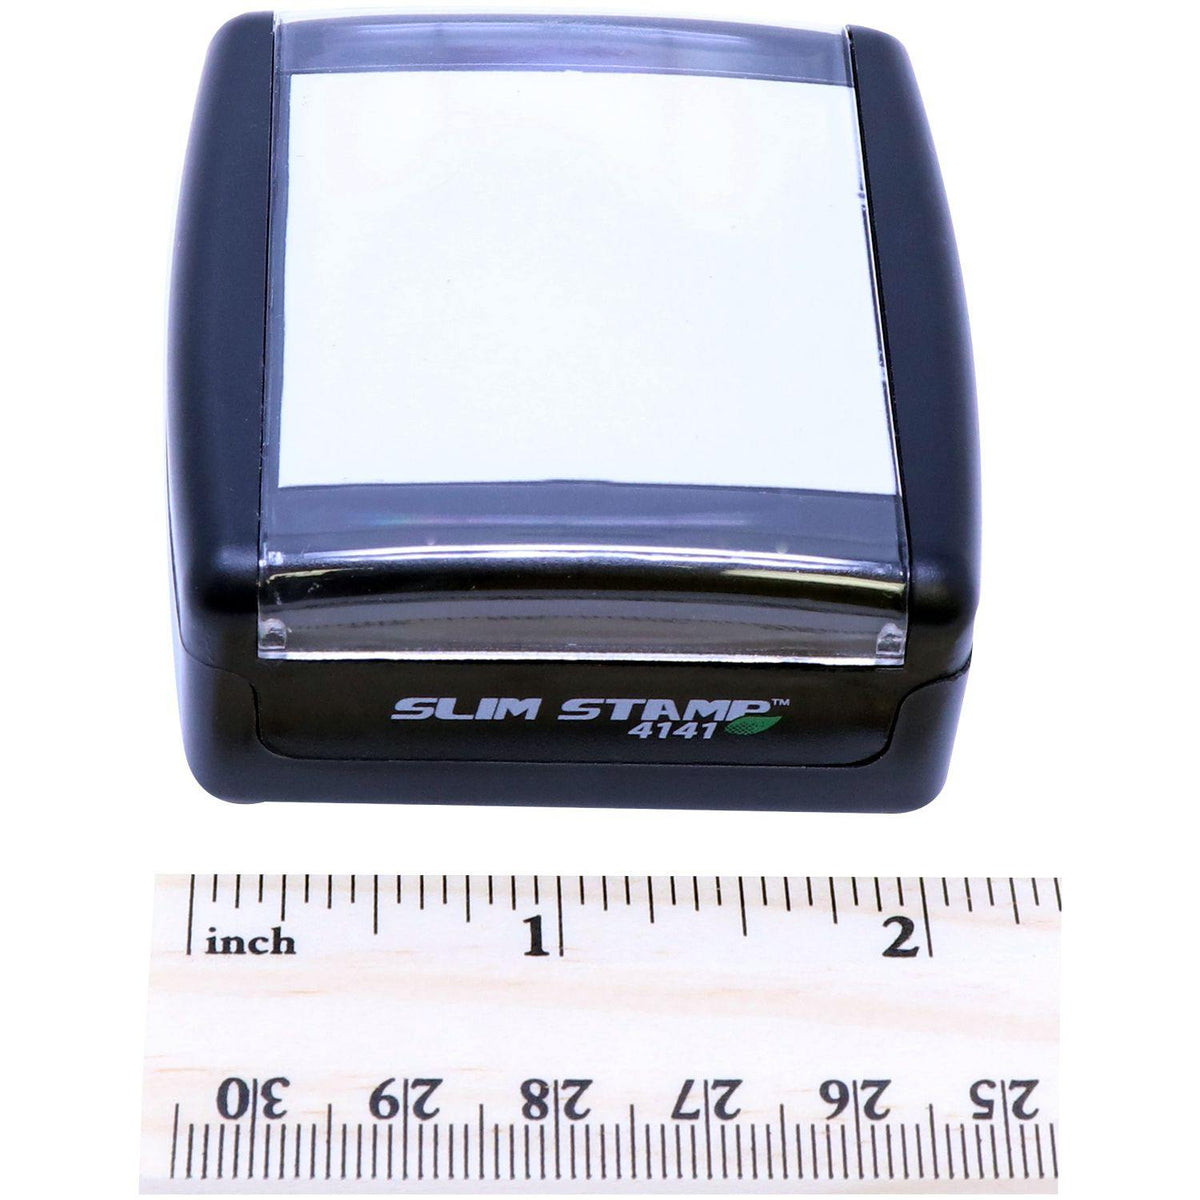 Forester Slim Pre-Inked Rubber Stamp of Seal - Engineer Seal Stamps - Stamp Type_Pre-Inked, Type of Use_Professional